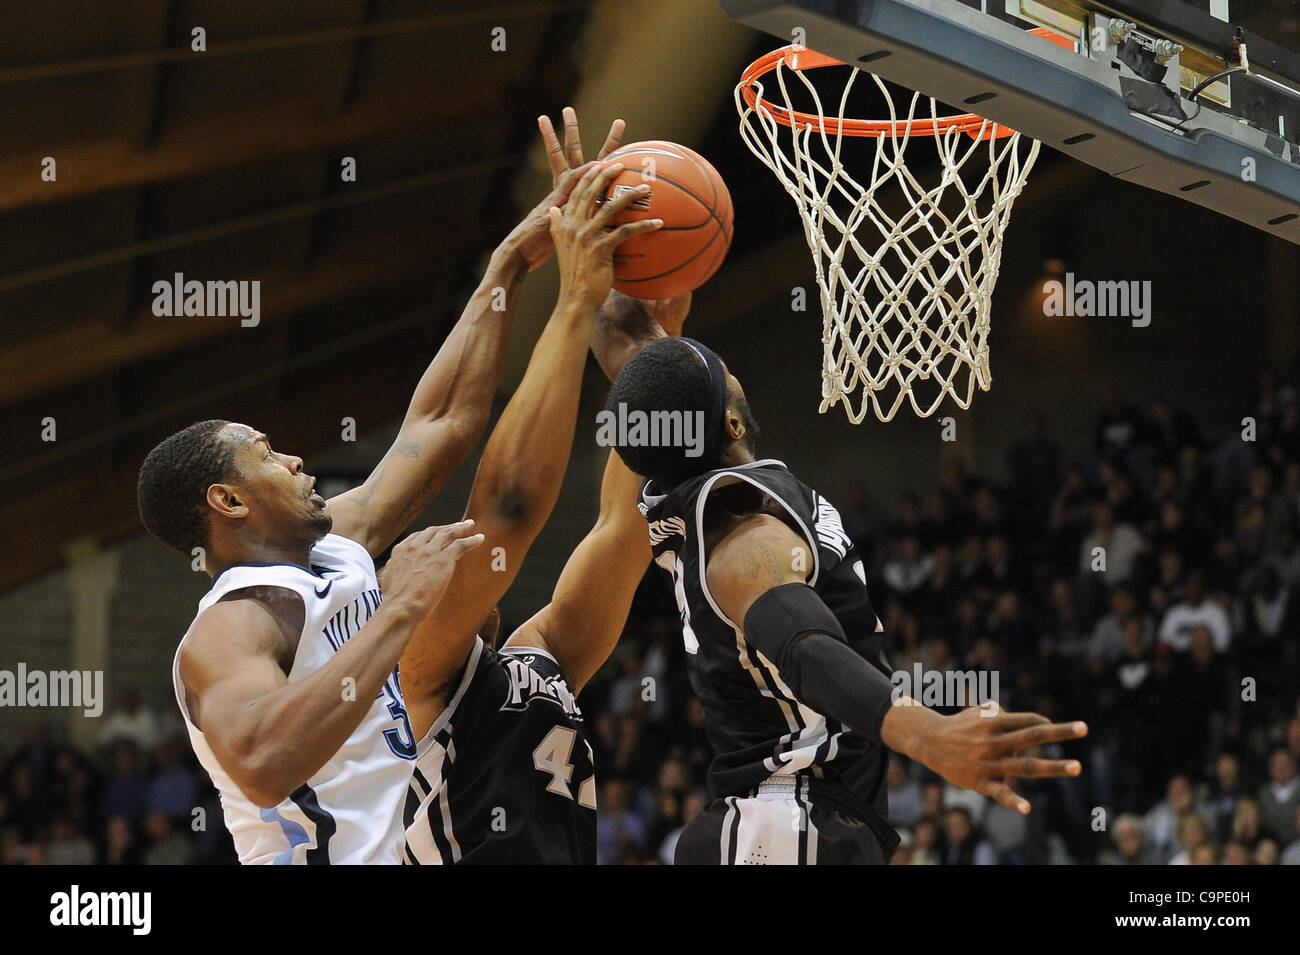 Feb. 7, 2012 - Villanova, Pennsylvania, U.S - Villanova Wildcats guard James Bell (32) blocks a shot by Providence Friars guard Chris Carter (41). In a game being played at The Pavilion in Villanova, Pennsylvania. Villanova defeats Providence by a score of 74-72. (Credit Image: © Mike McAtee/Southcr Stock Photo